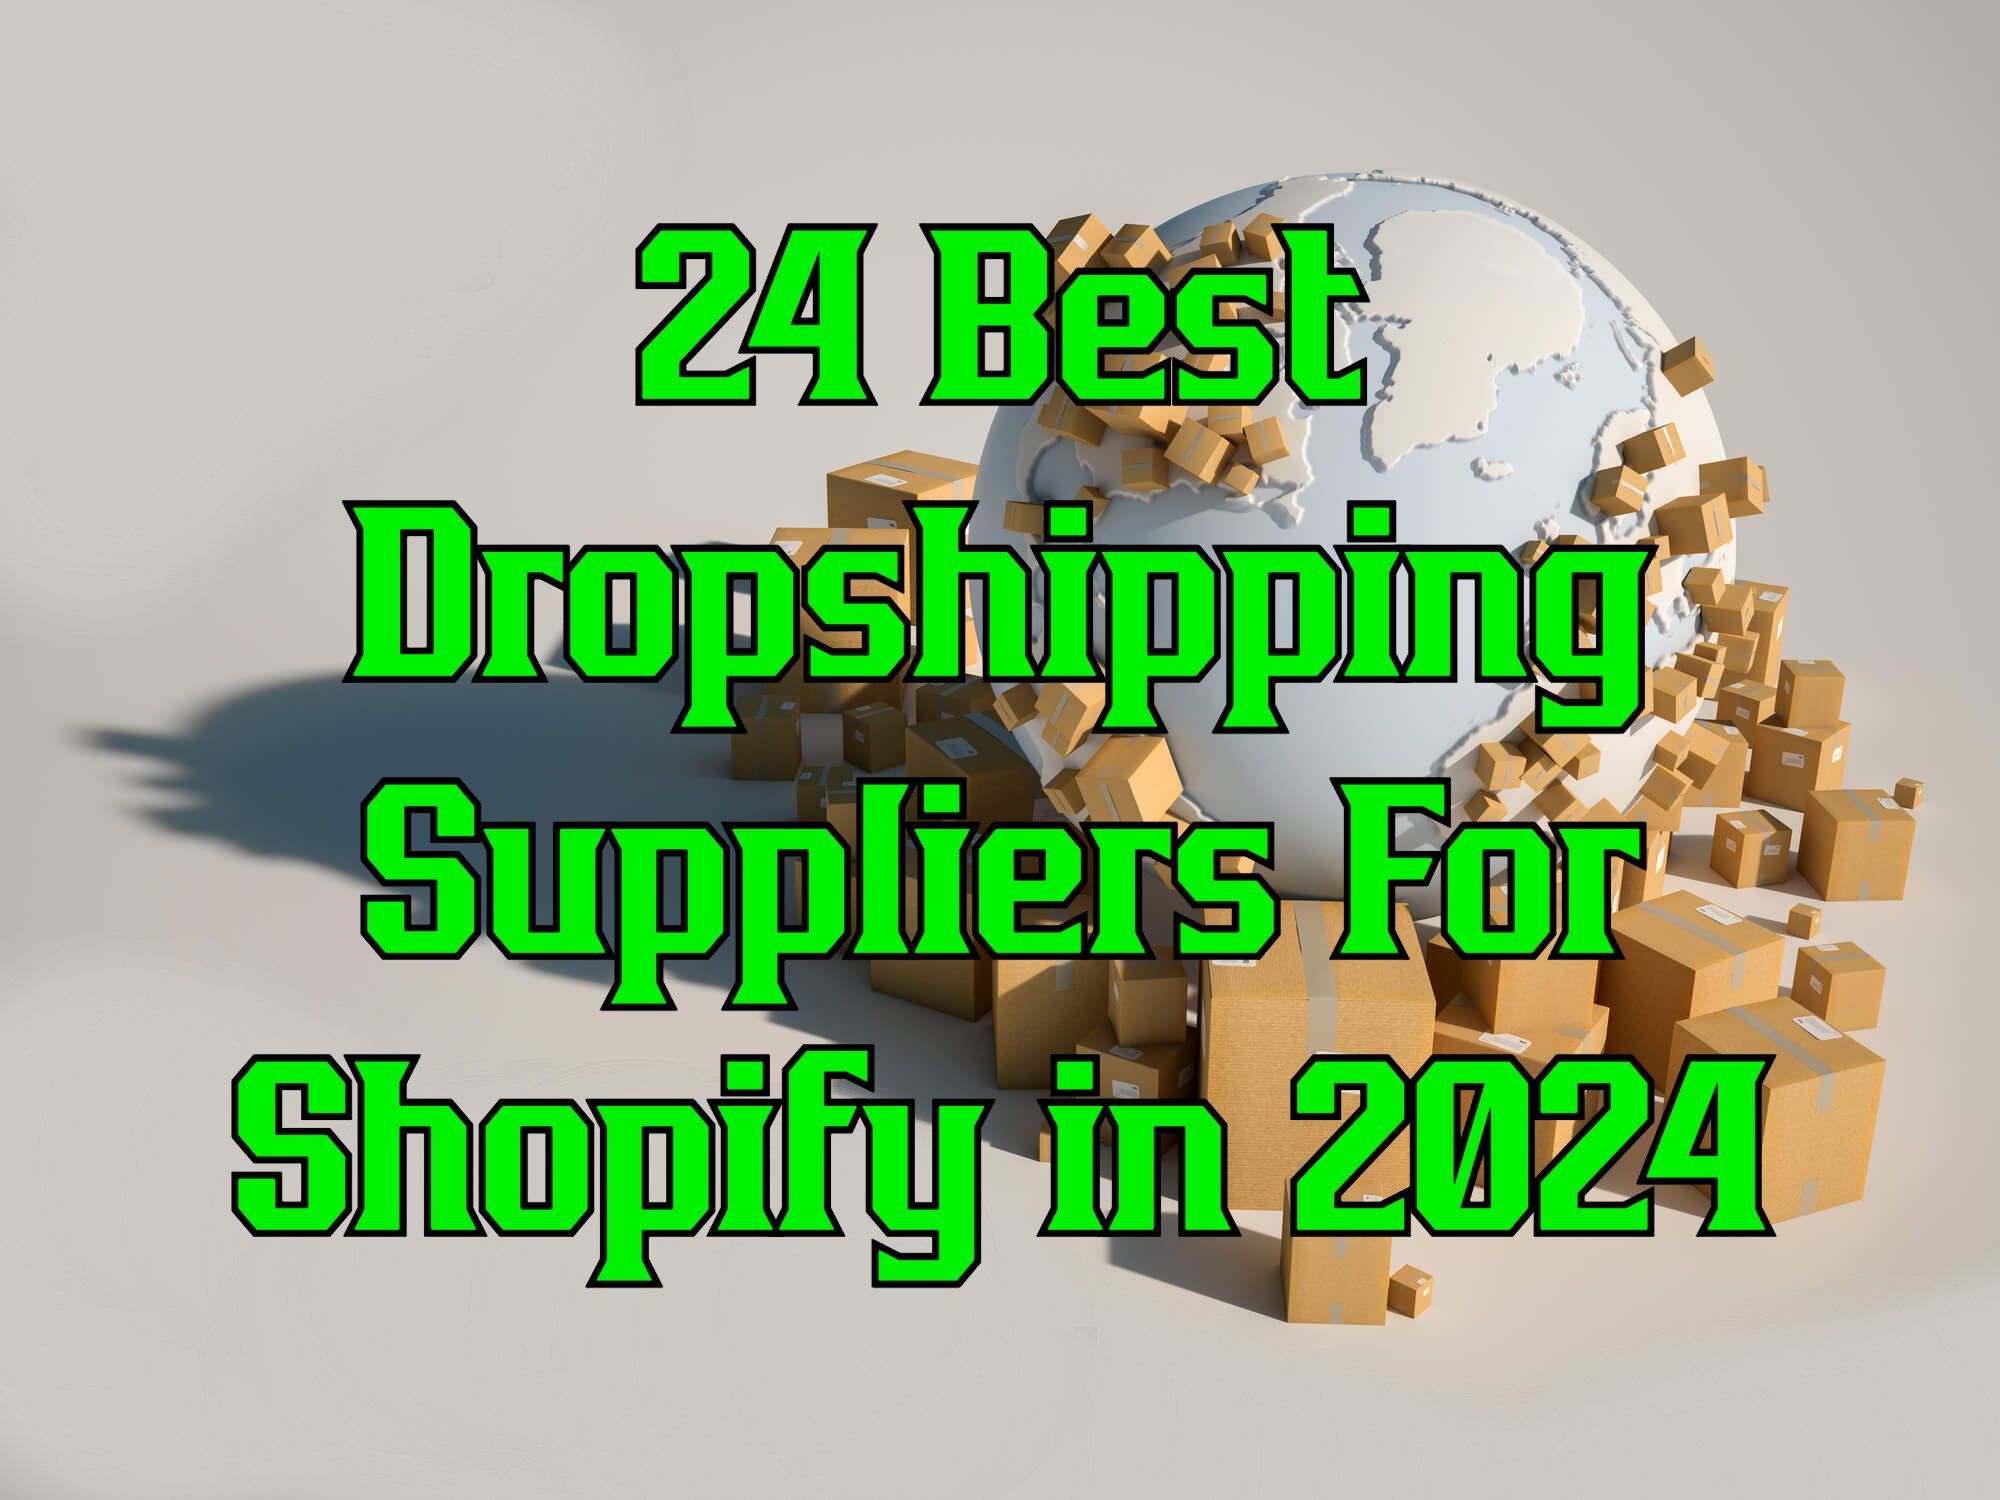 Best Shopify Dropshipping Suppliers